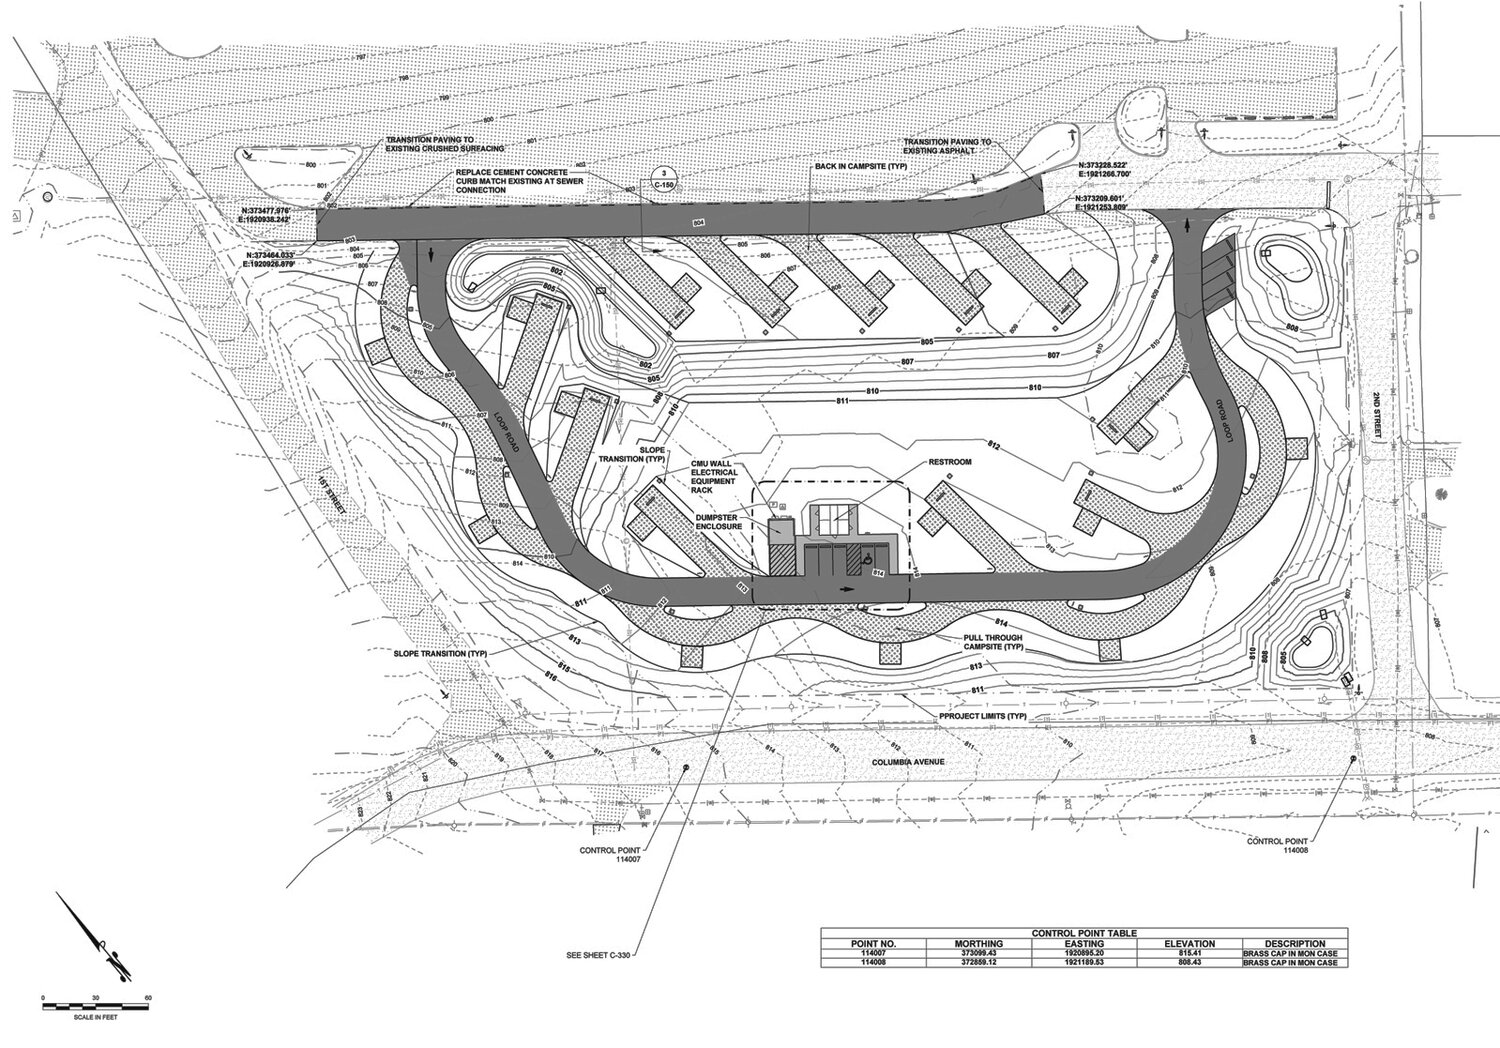 This PUD schematic shows the arrangement of the 17 RV spaces with 11 inside the Loop Road and the remaining six around the perimeter.